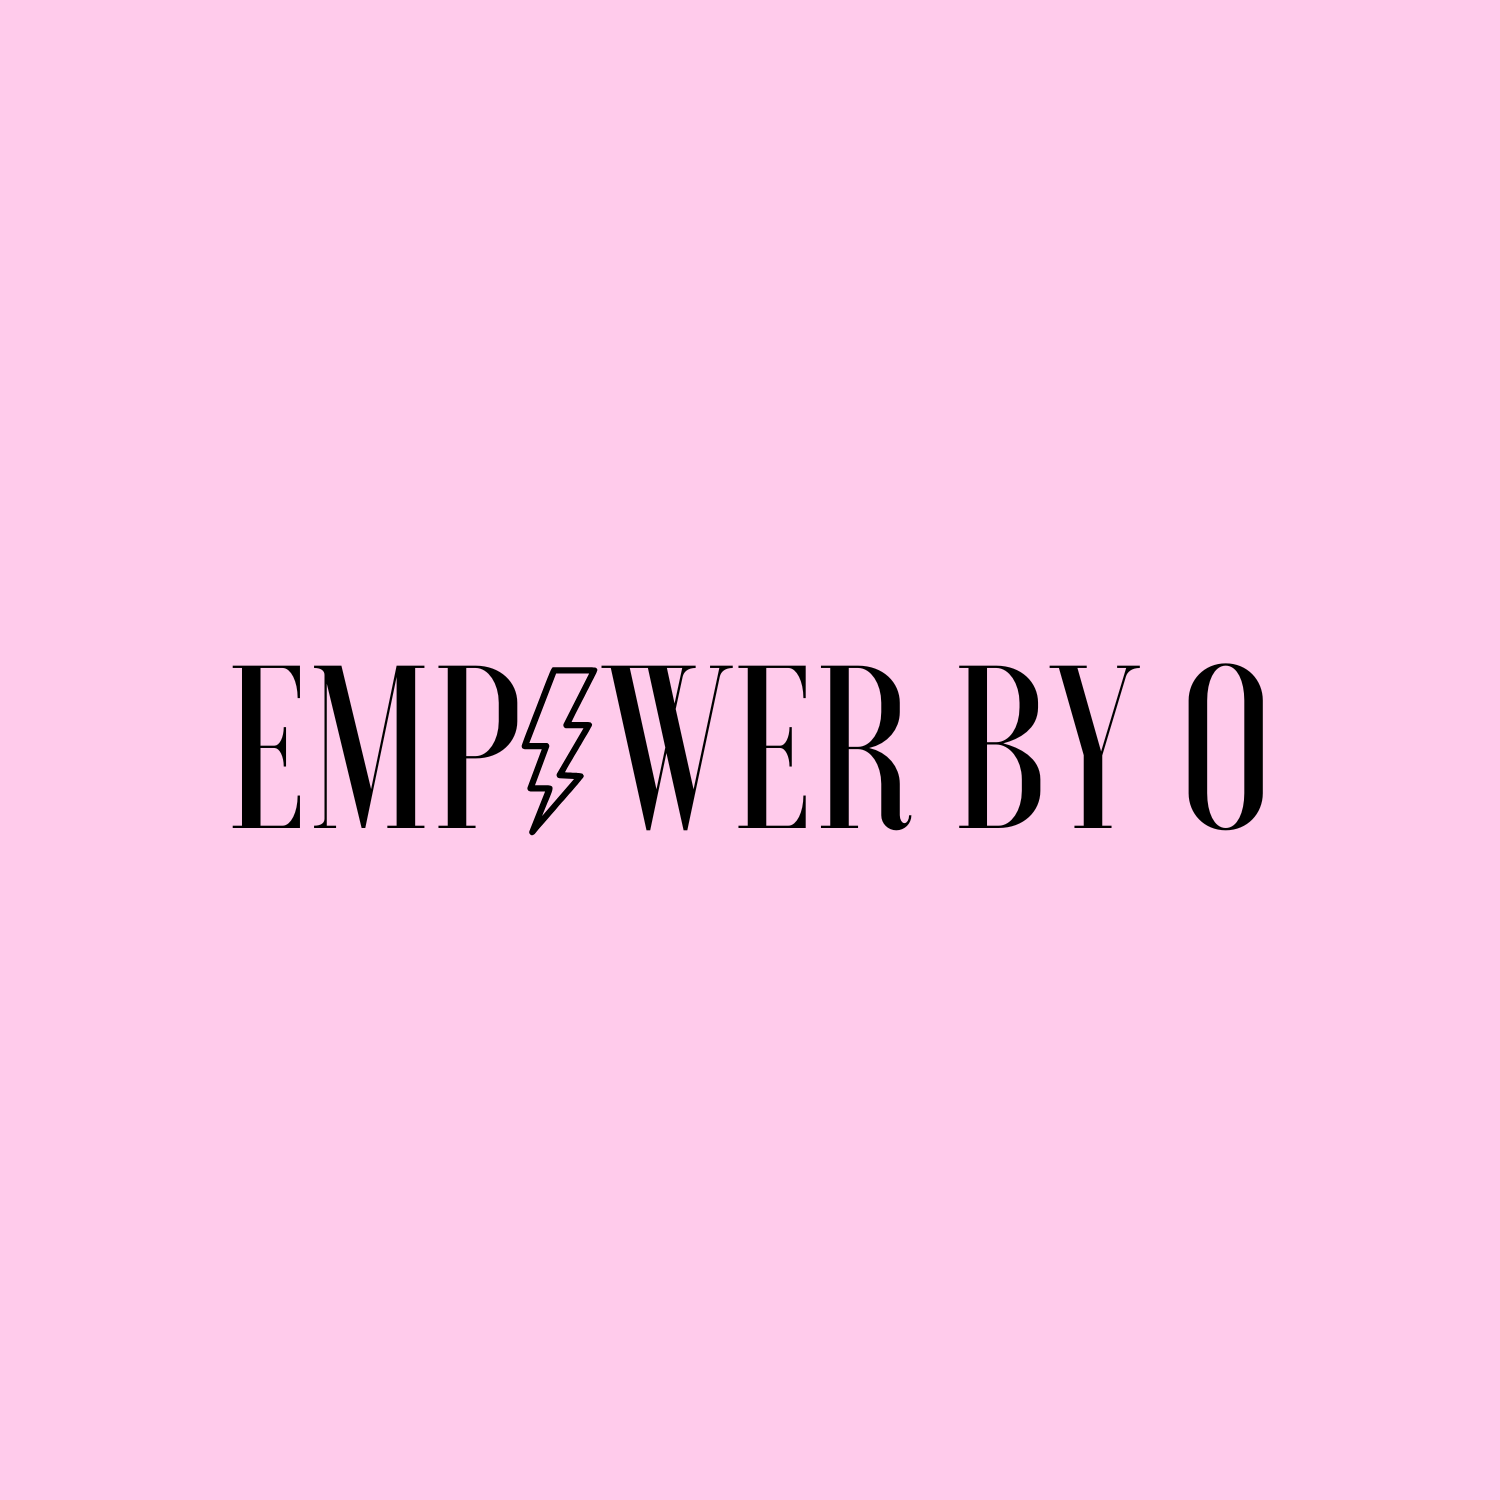 Empower by O